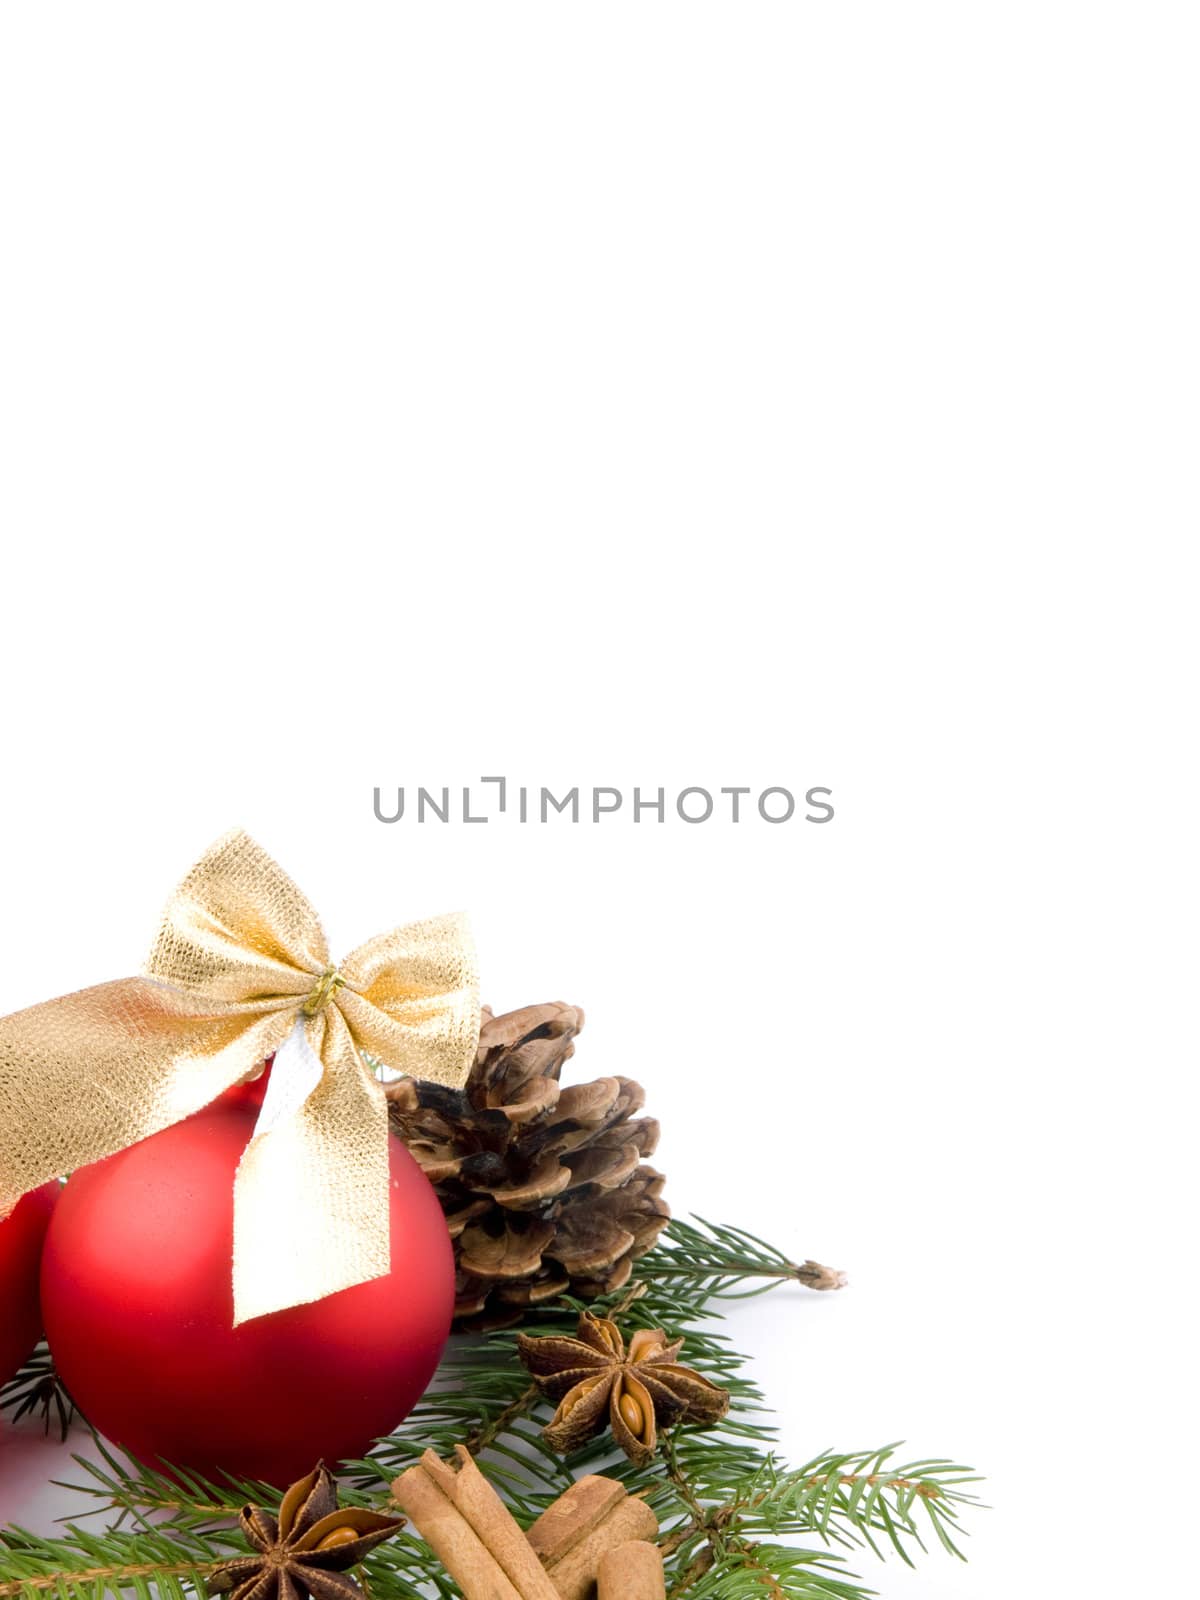 Picture of red glass ball and fresh spruce on white background - copy space